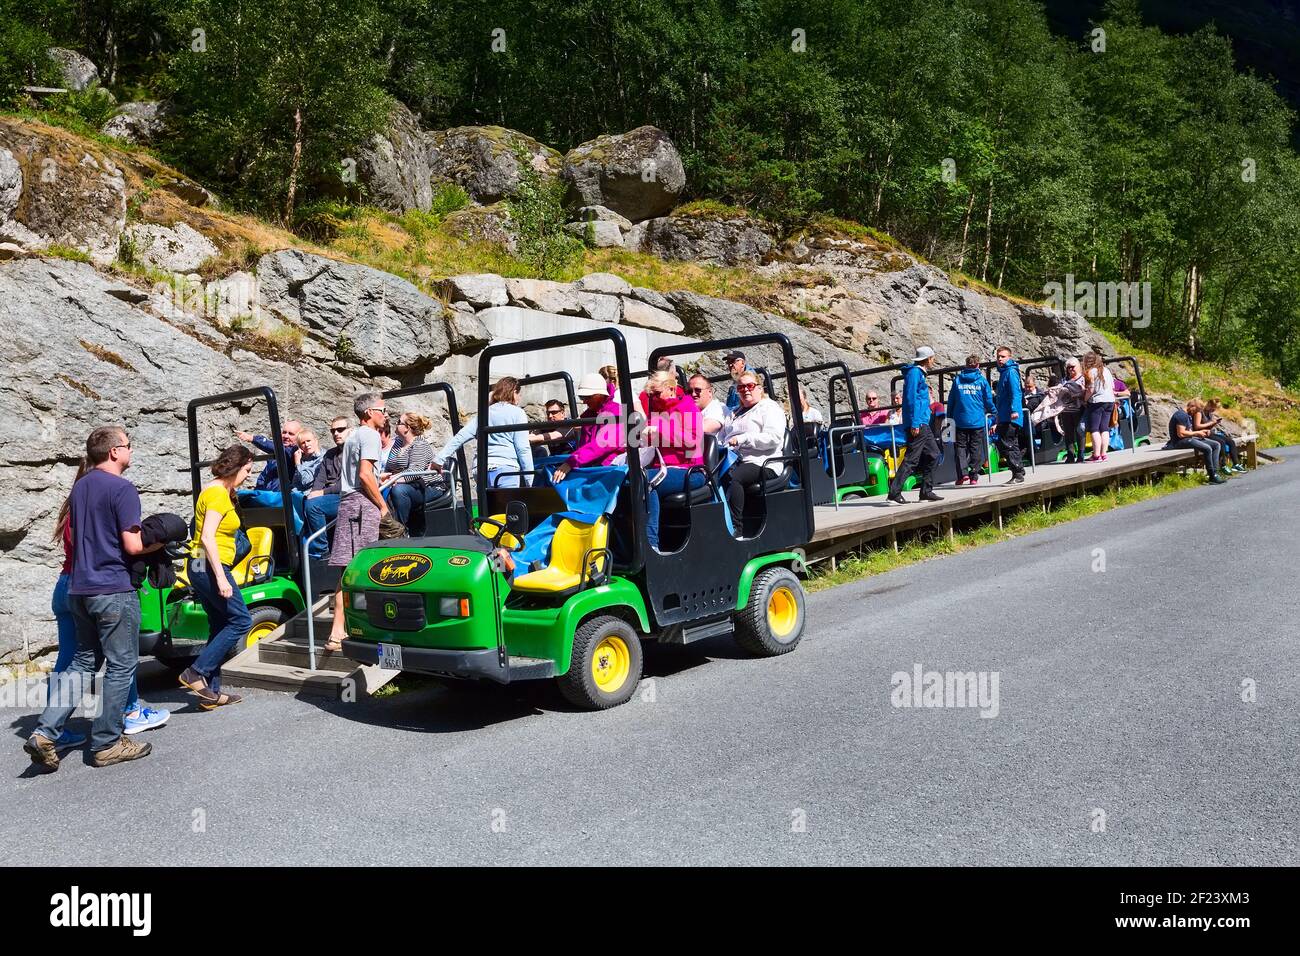 Troll car at Briksdal way in Norway Stock Photo - Alamy